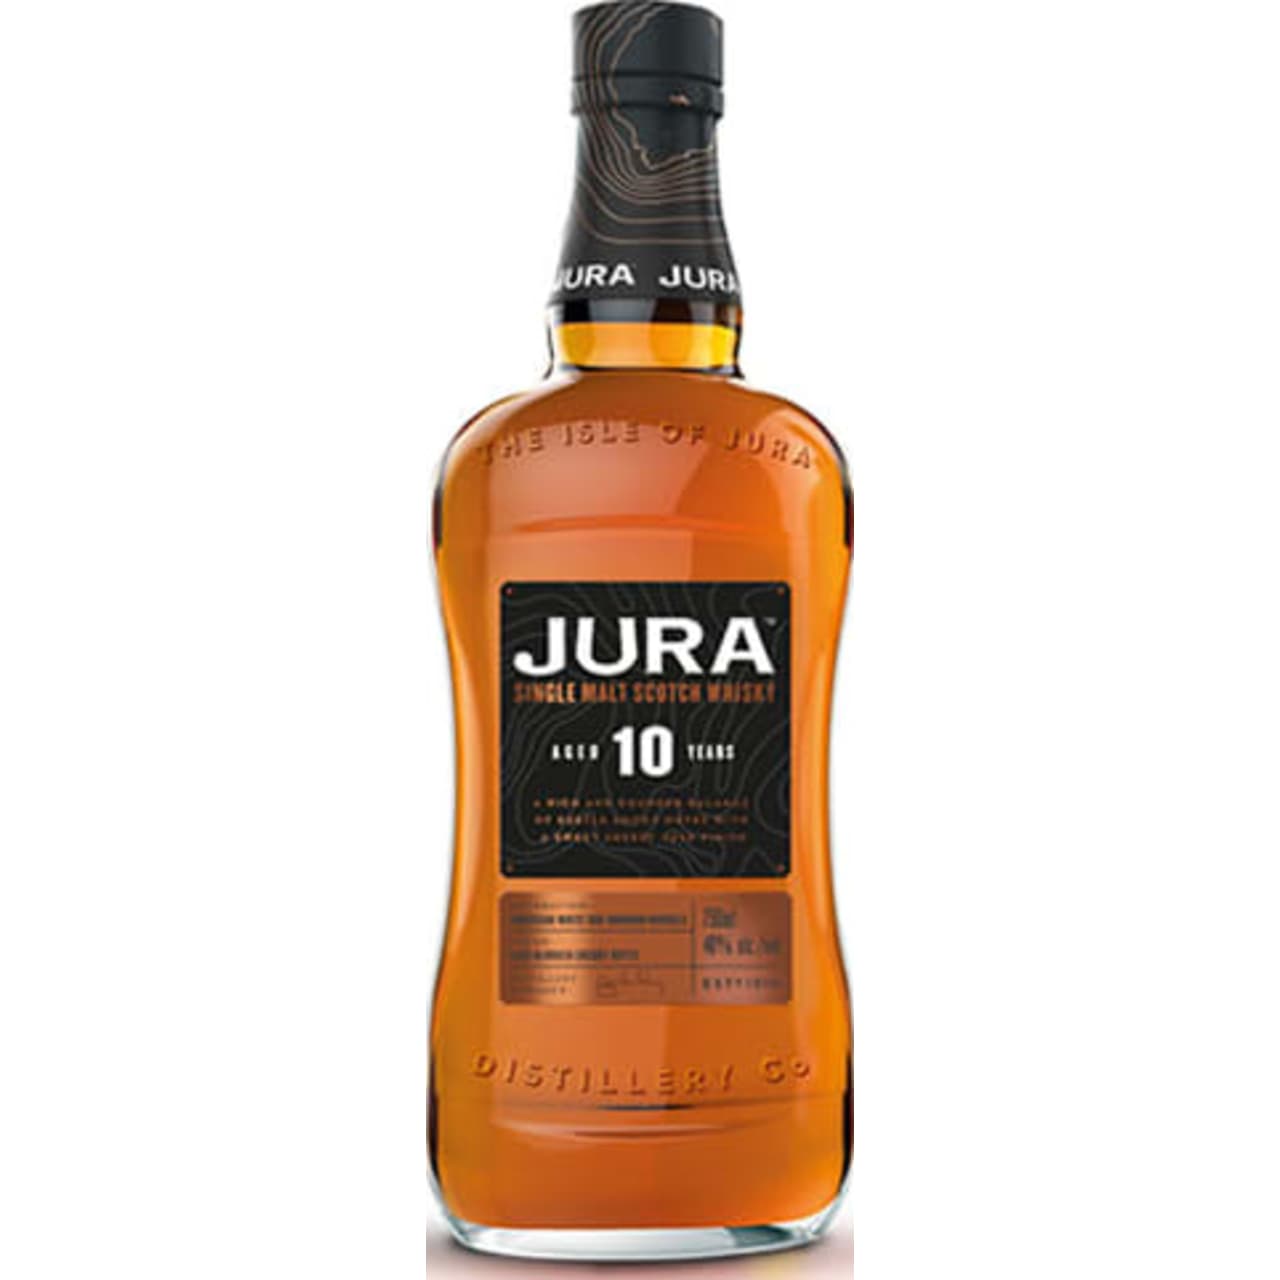 Initially aged in American white oak bourbon barrels before enjoying a finishing period in Oloroso sherry butts and bottled at 40% ABV. It has the subtle smoke characteristic of Jura's excellent Island single malts, with robust vanilla and an intense kick of sherried sweetness underneath.